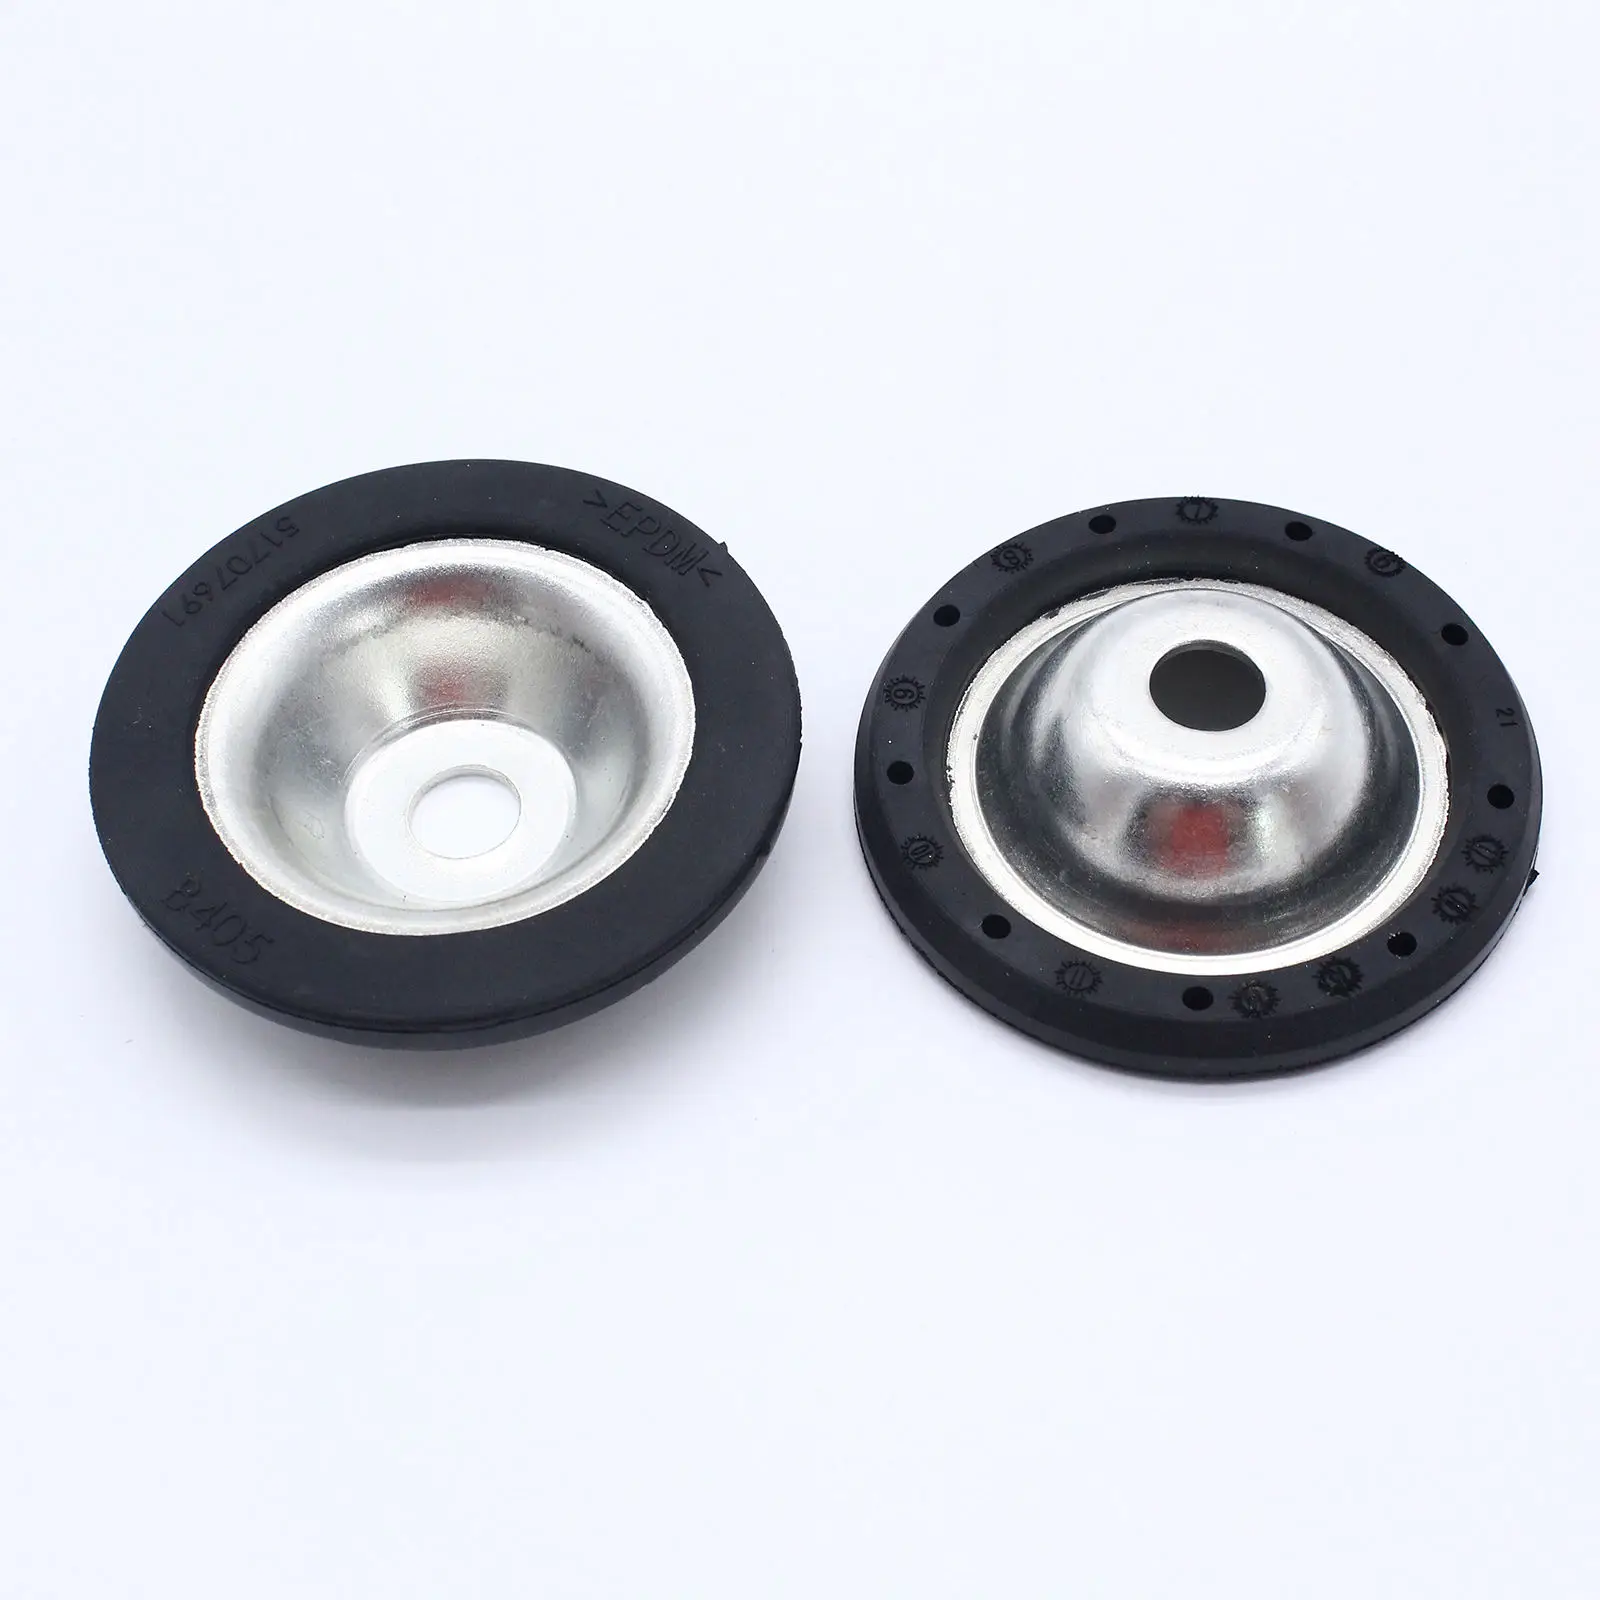 Car Top Shock Absorber Mount Plates for Fiat 51707691 Car Accessories